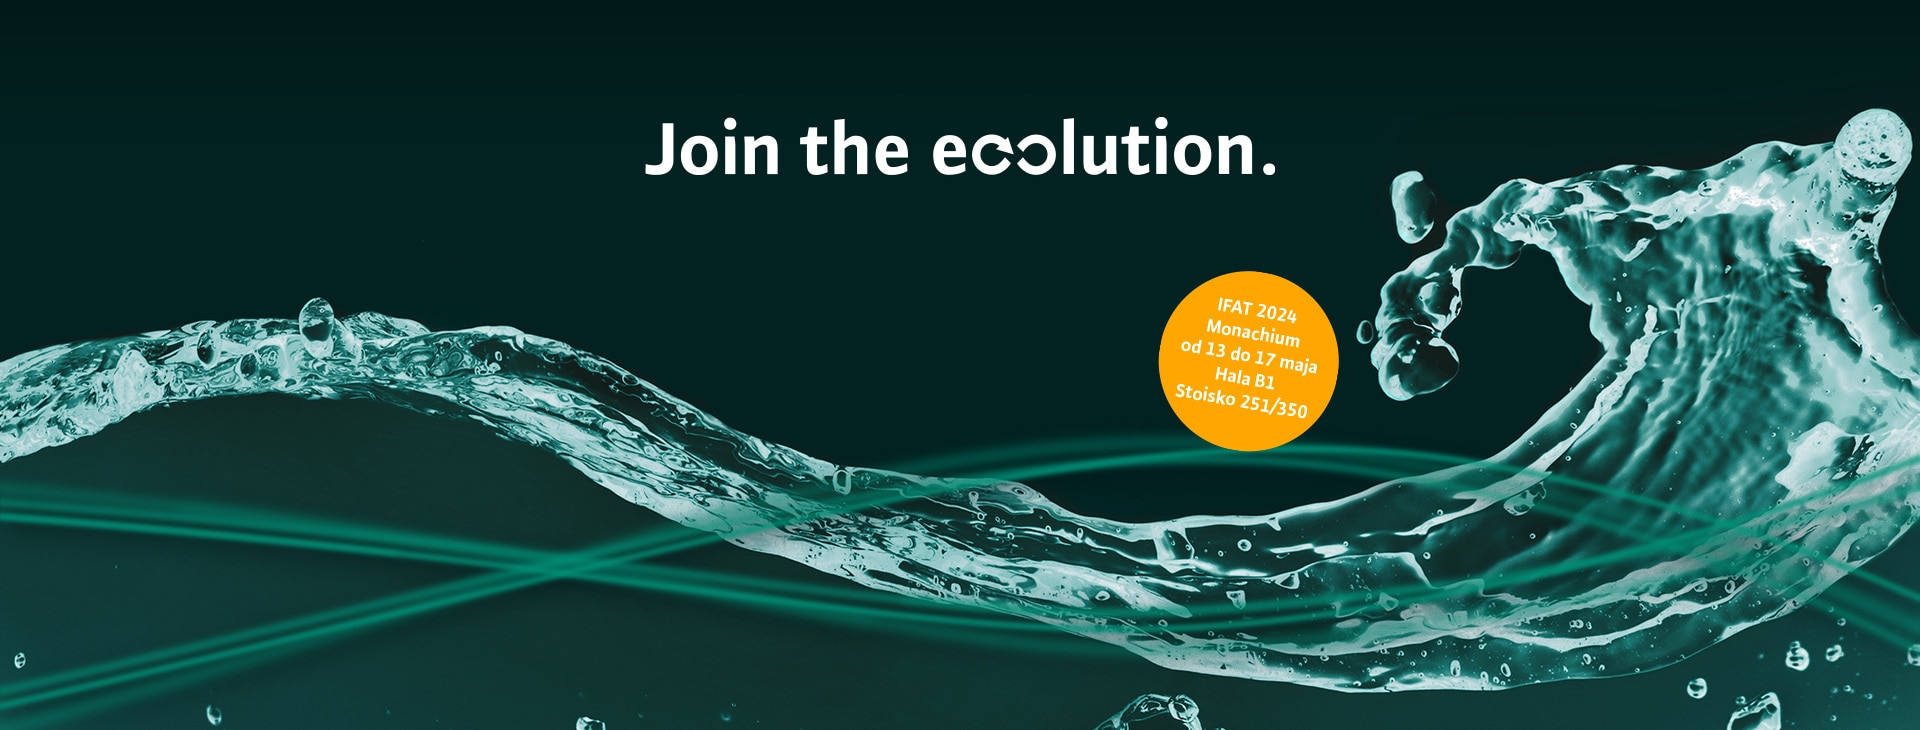 Baner - Join the ecolution